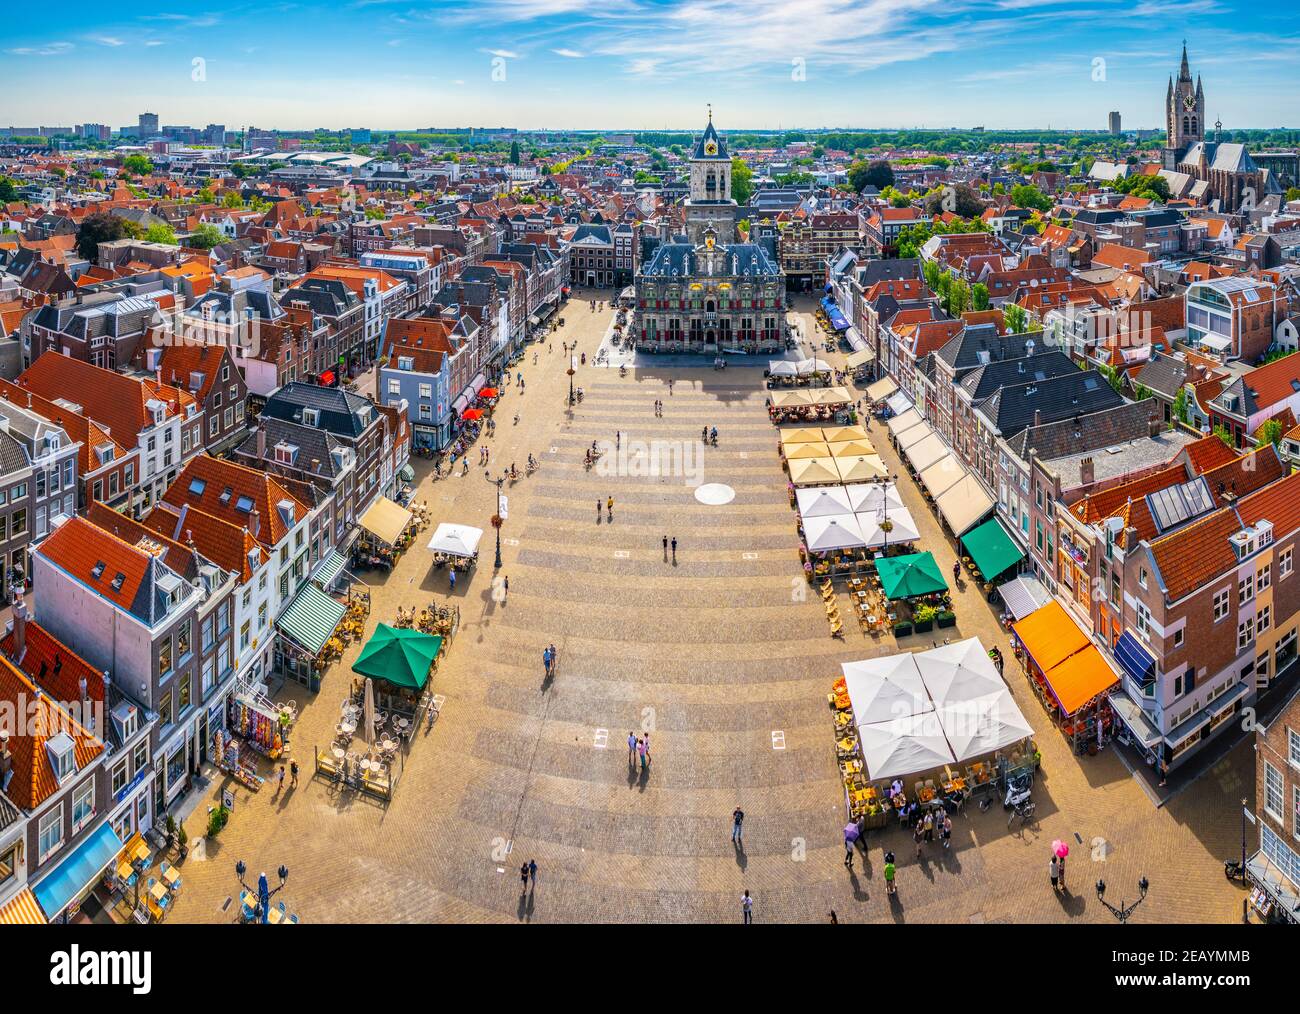 DELFT, NETHERLANDS, AUGUST 6, 2018: Aerial view of the main square in Delft, Netherlands Stock Photo